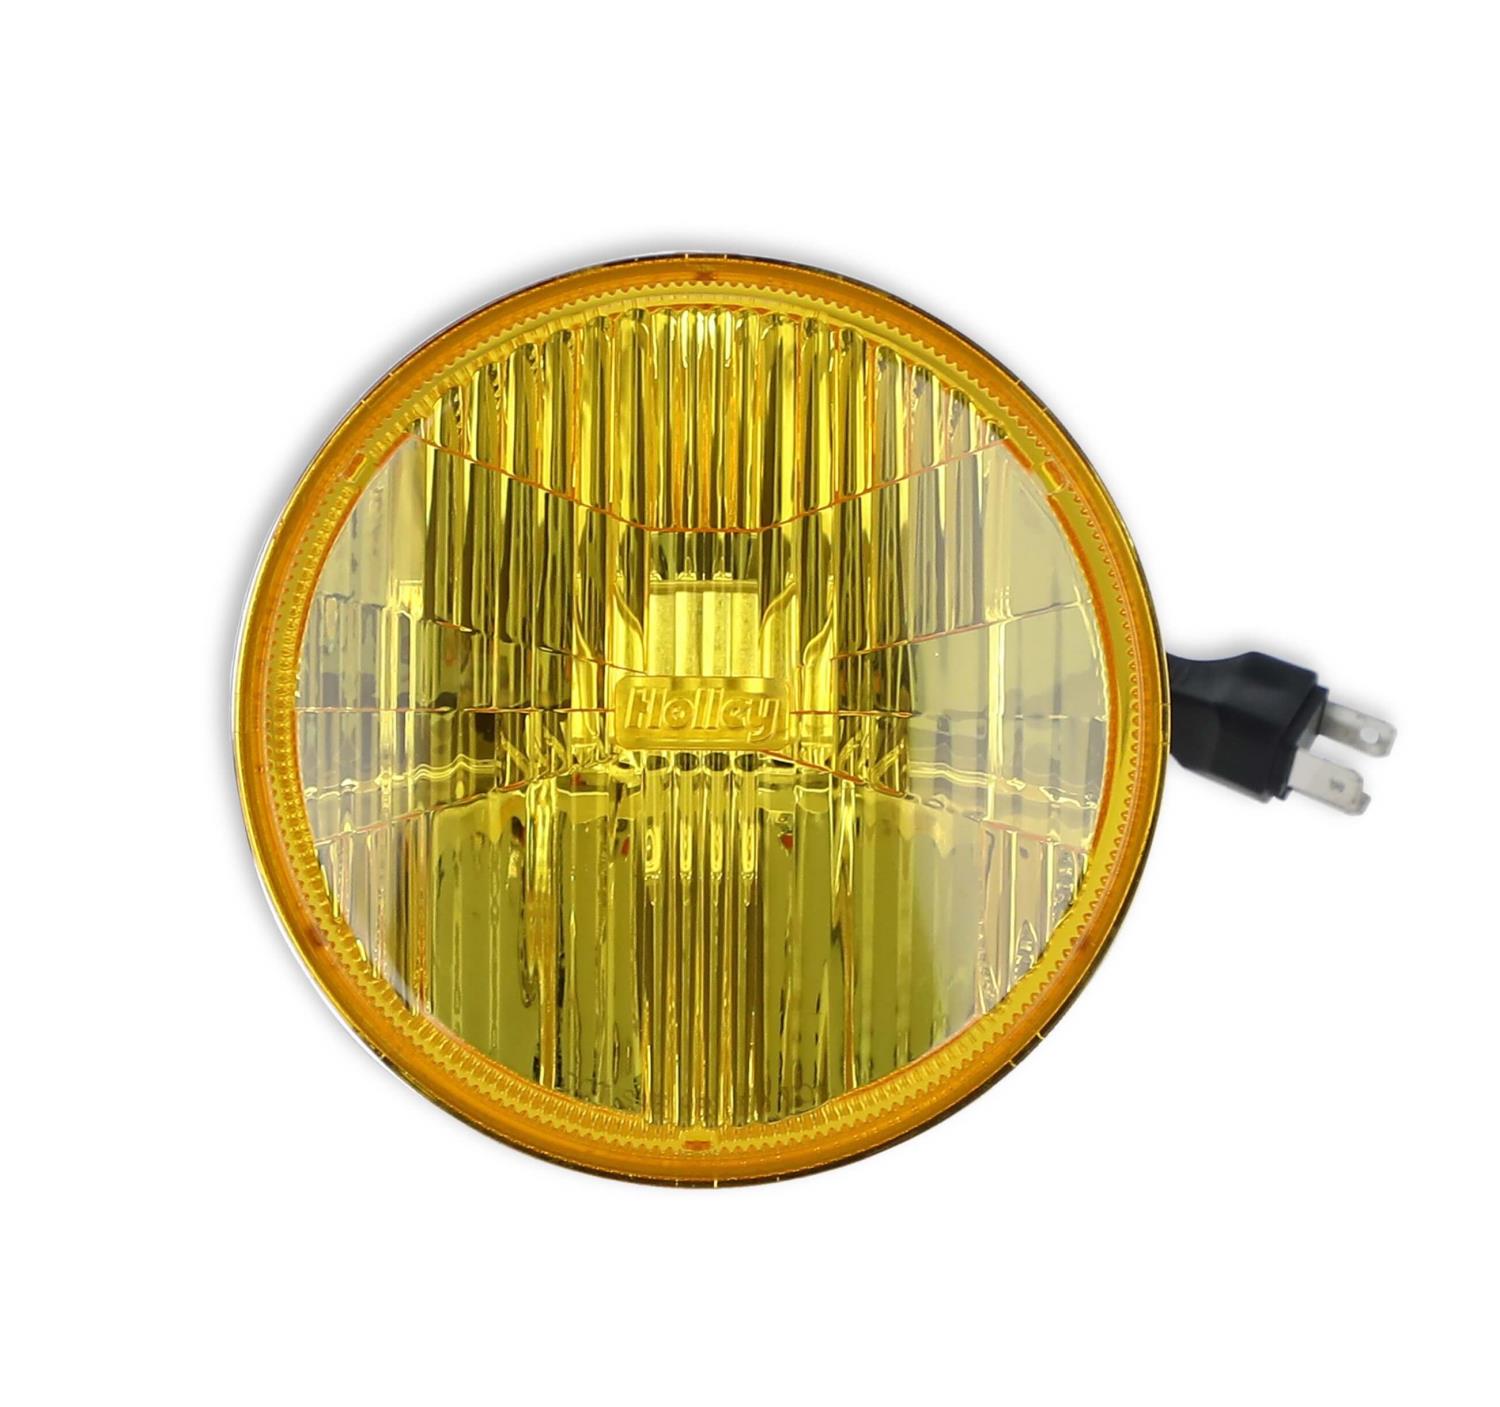 LFRB105 RetroBright LED 5 3/4 in. Round Headlight for Select 1957-1992 Vehicles with 4-Headlight System [Yellow]